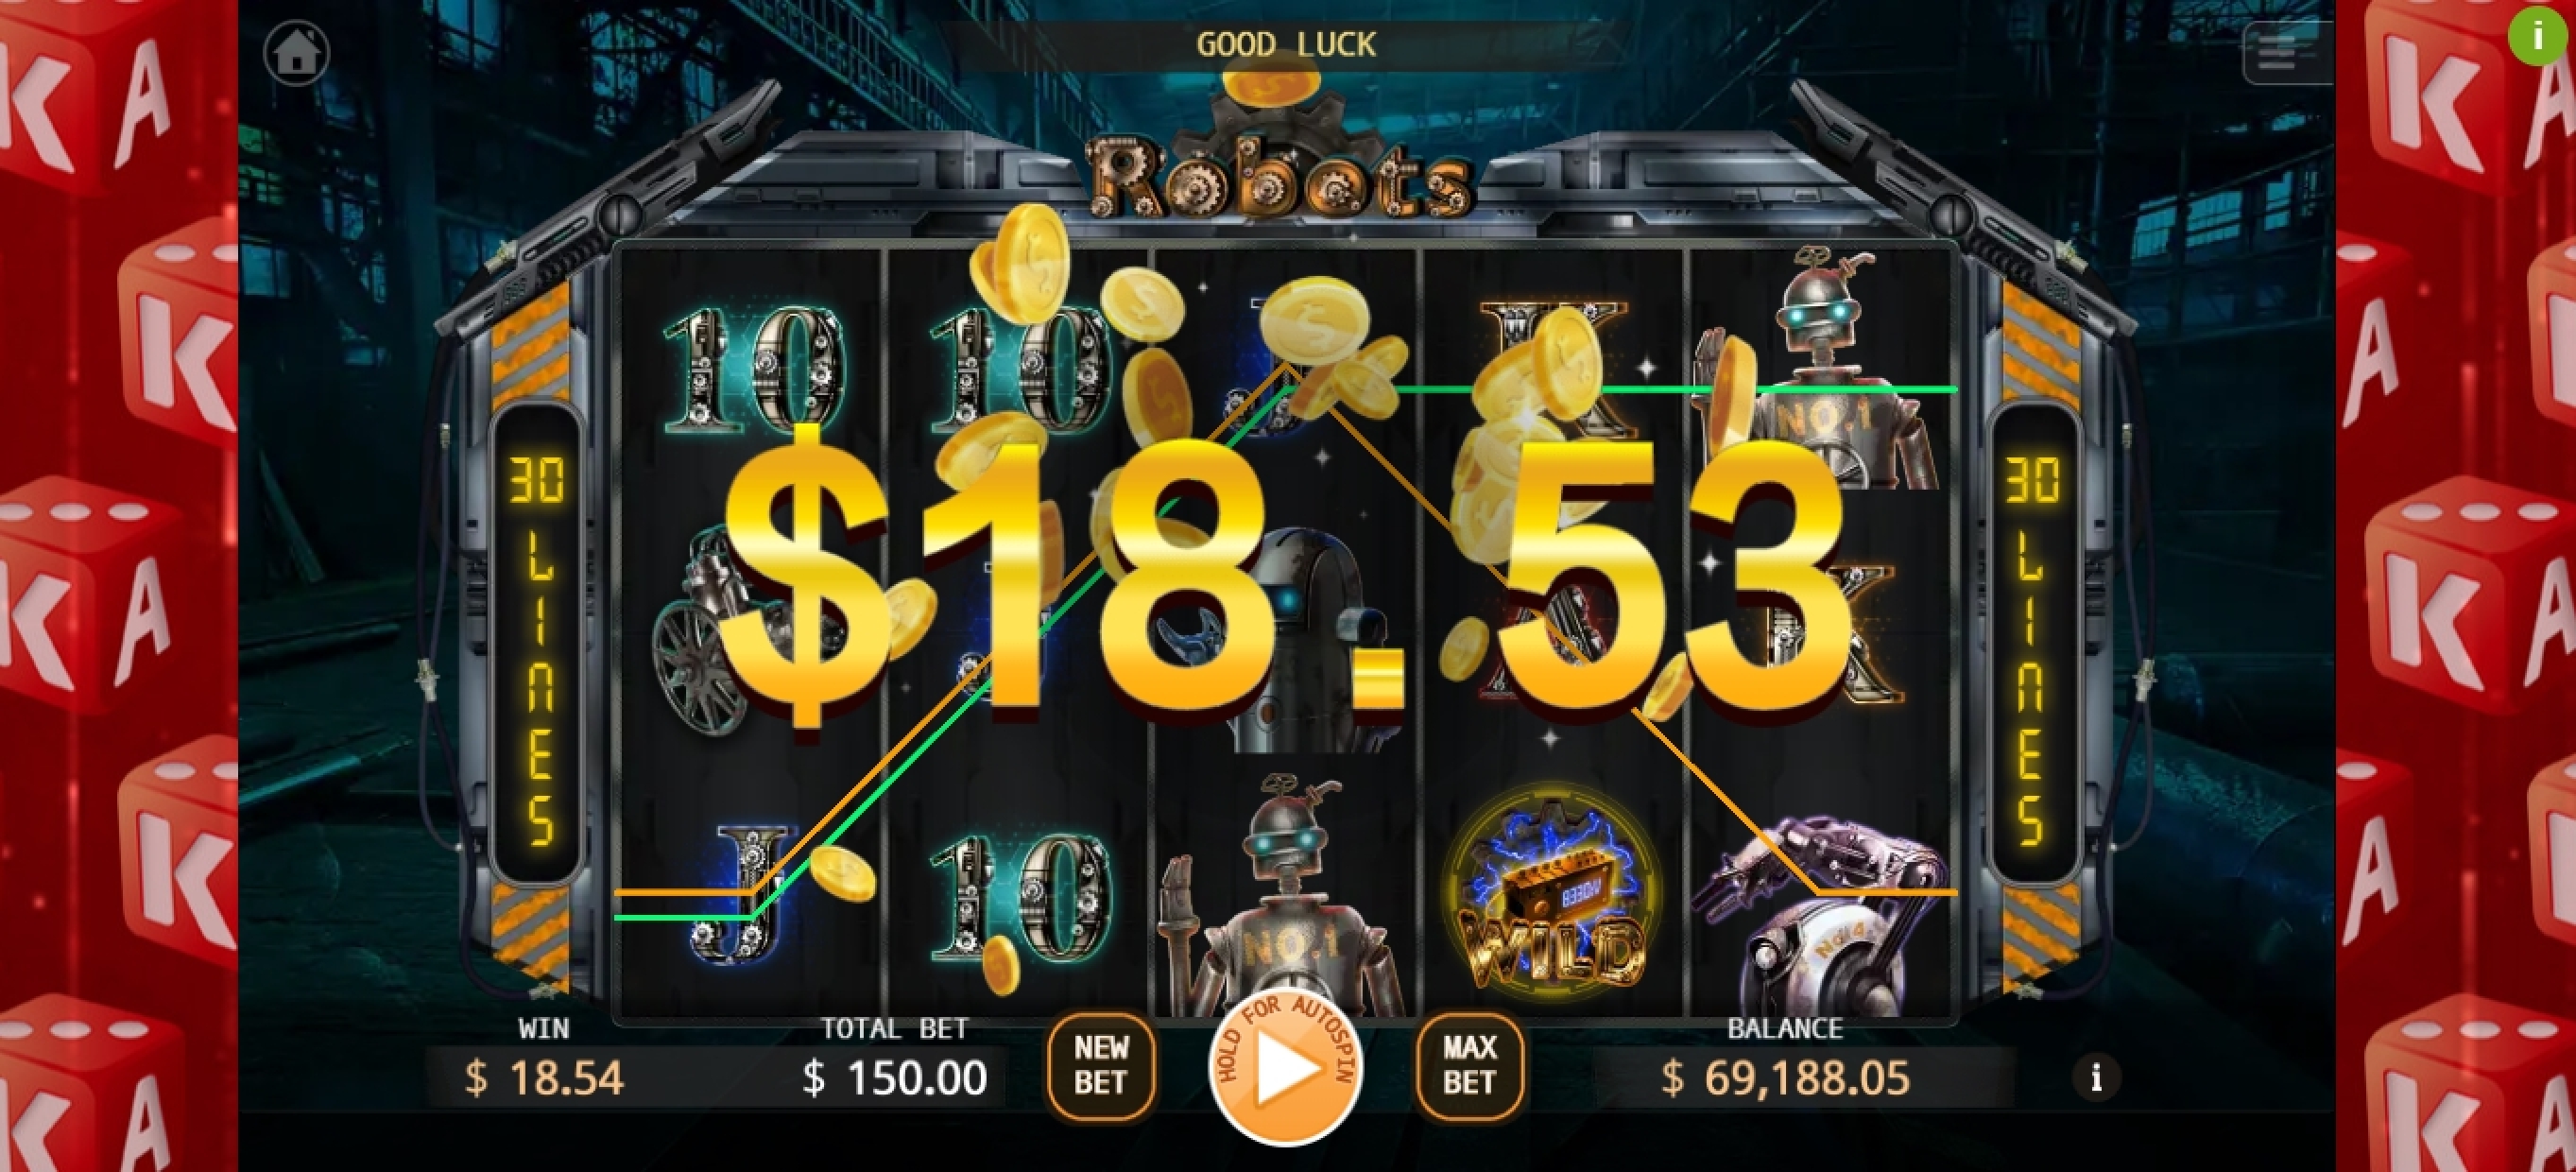 Win Money in Robots Free Slot Game by KA Gaming